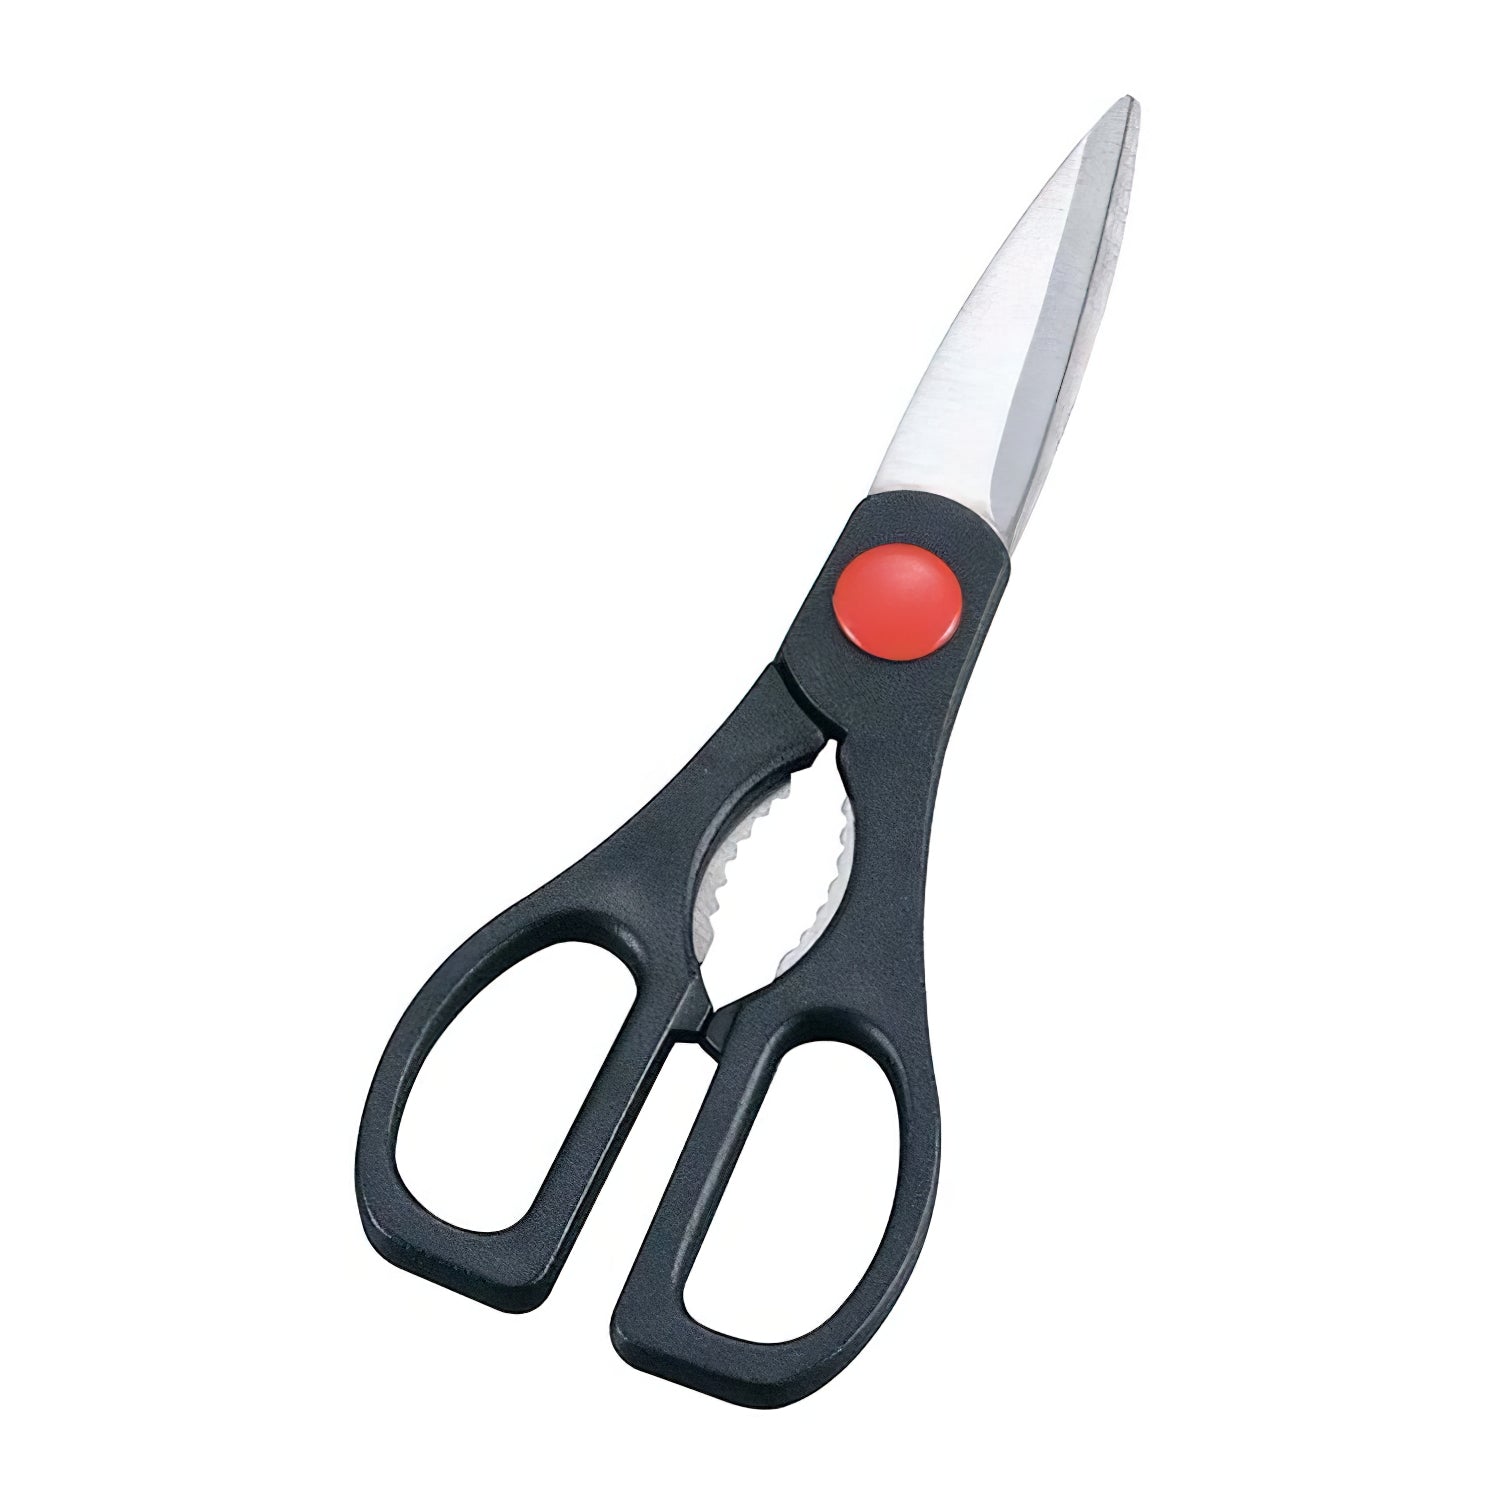 Zwilling J.A. Henckels Red Multi-Purpose Stainless Steel Kitchen Shears